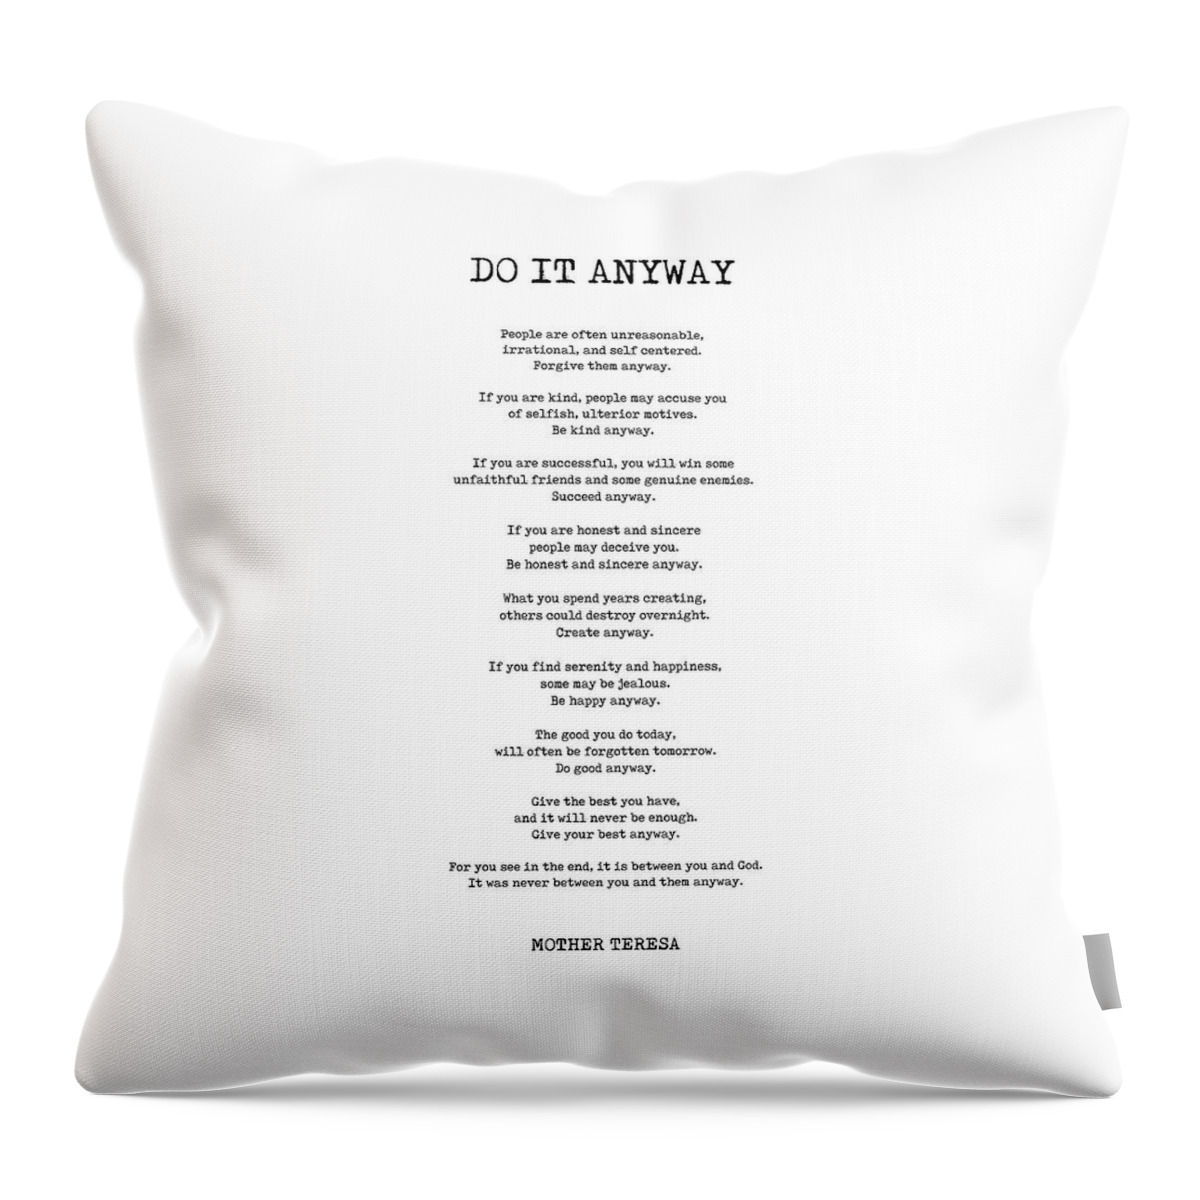 Do It Anyway Throw Pillow featuring the digital art Do It Anyway - Mother Teresa Poem - Literature - Typewriter Print 2 by Studio Grafiikka